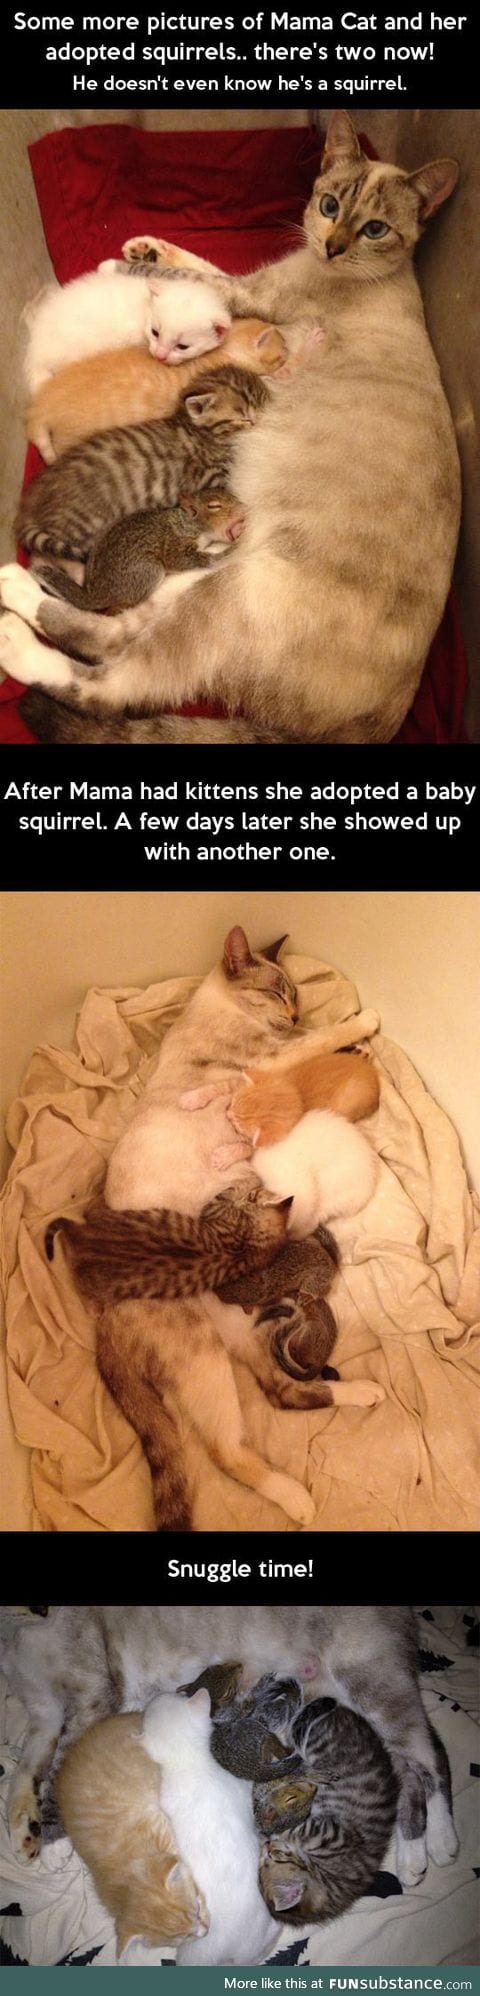 Mama cat and her tiny squirrels